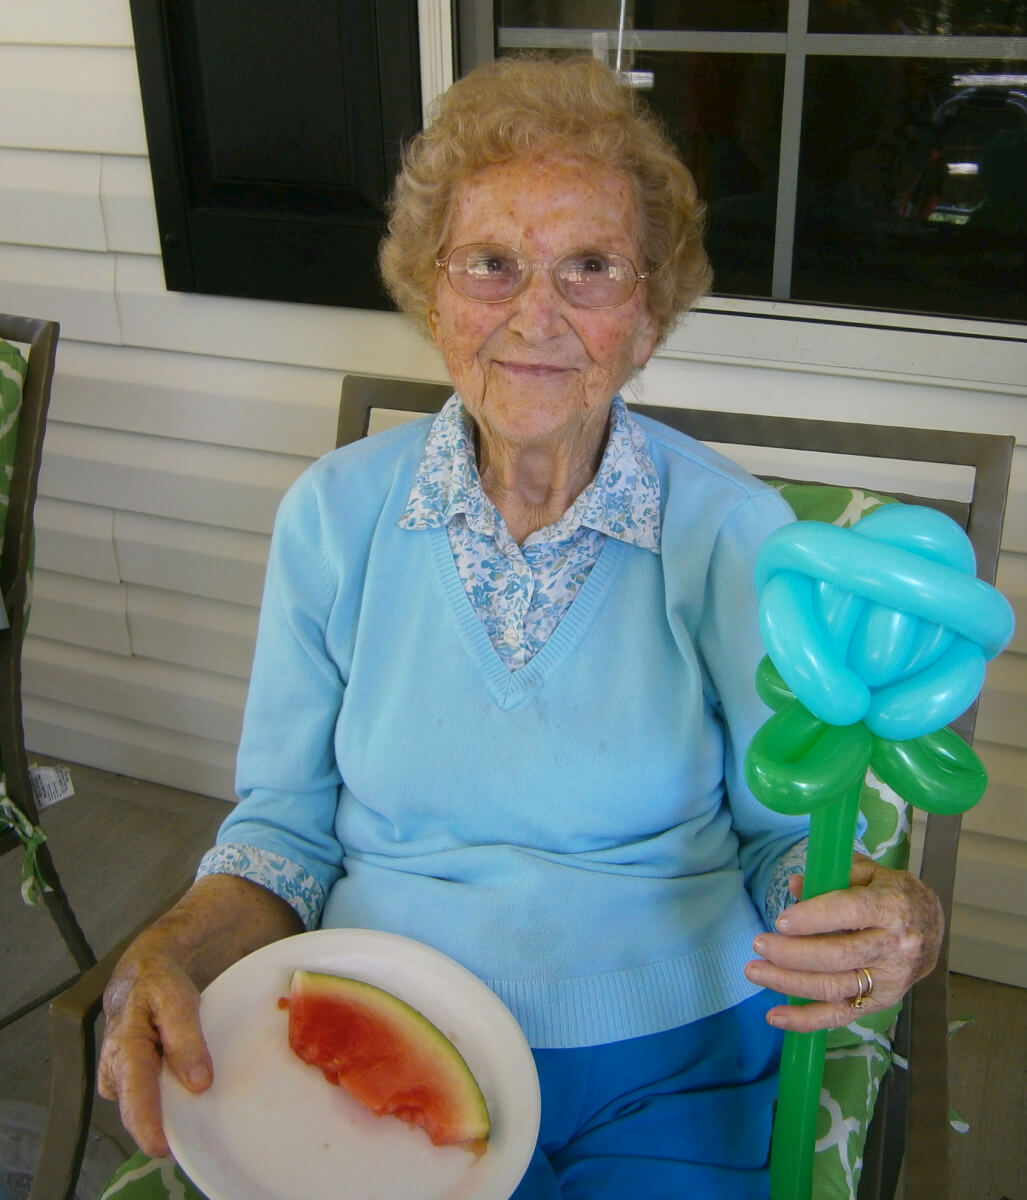 Cambridge House resident Joie Dayberry  with her watermelon and balloon flower